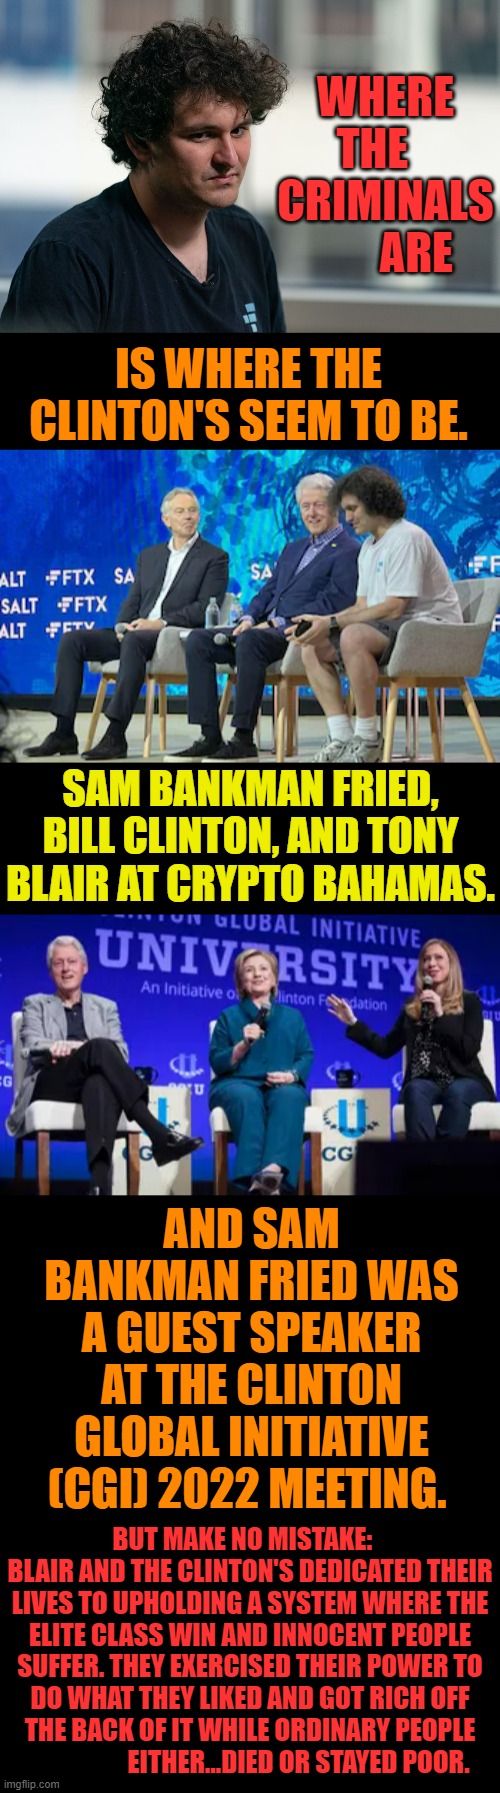 Can You Also See... | WHERE THE    CRIMINALS        ARE; IS WHERE THE CLINTON'S SEEM TO BE. SAM BANKMAN FRIED, BILL CLINTON, AND TONY BLAIR AT CRYPTO BAHAMAS. AND SAM BANKMAN FRIED WAS A GUEST SPEAKER AT THE CLINTON GLOBAL INITIATIVE (CGI) 2022 MEETING. BUT MAKE NO MISTAKE:    BLAIR AND THE CLINTON'S DEDICATED THEIR LIVES TO UPHOLDING A SYSTEM WHERE THE ELITE CLASS WIN AND INNOCENT PEOPLE SUFFER. THEY EXERCISED THEIR POWER TO DO WHAT THEY LIKED AND GOT RICH OFF THE BACK OF IT WHILE ORDINARY PEOPLE                    EITHER...DIED OR STAYED POOR. | image tagged in memes,politics,bill and hillary clinton,clinton foundation,crypto,corruption | made w/ Imgflip meme maker